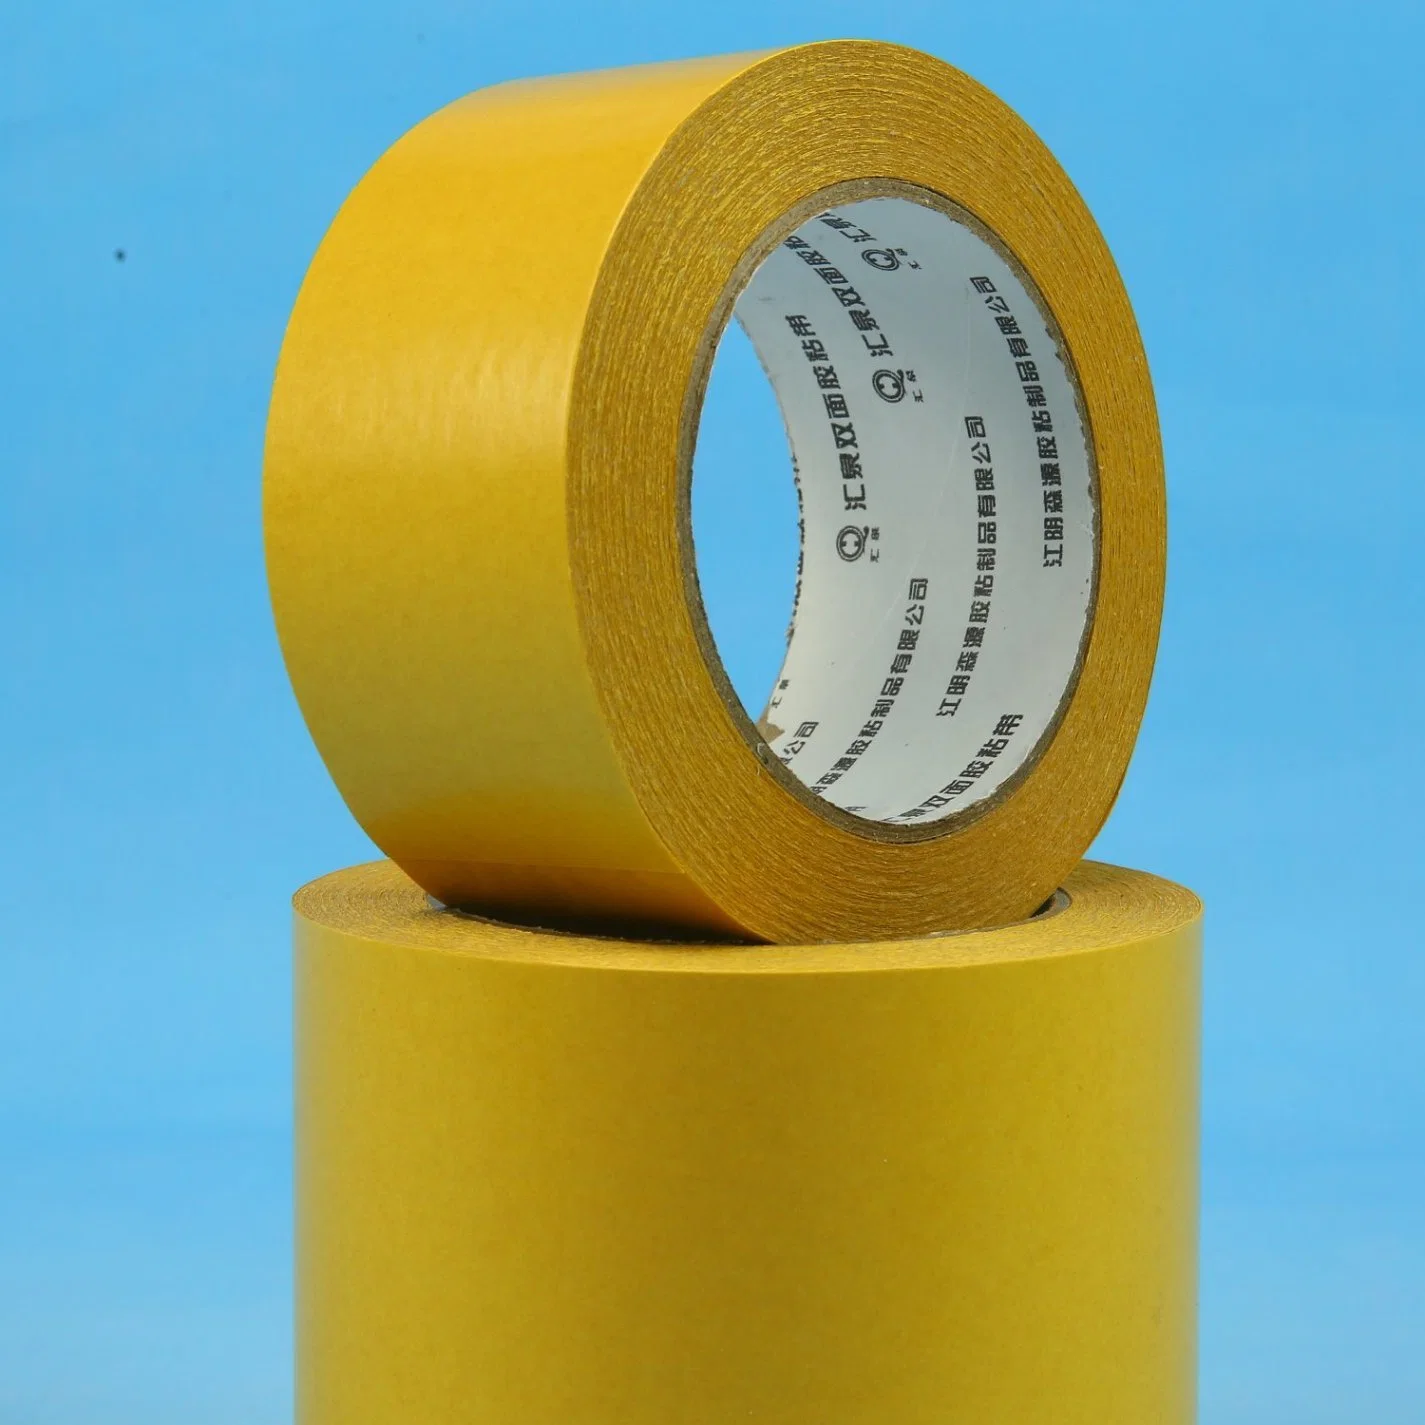 Bonding of Cotton and Felt Products Double Sided Tape